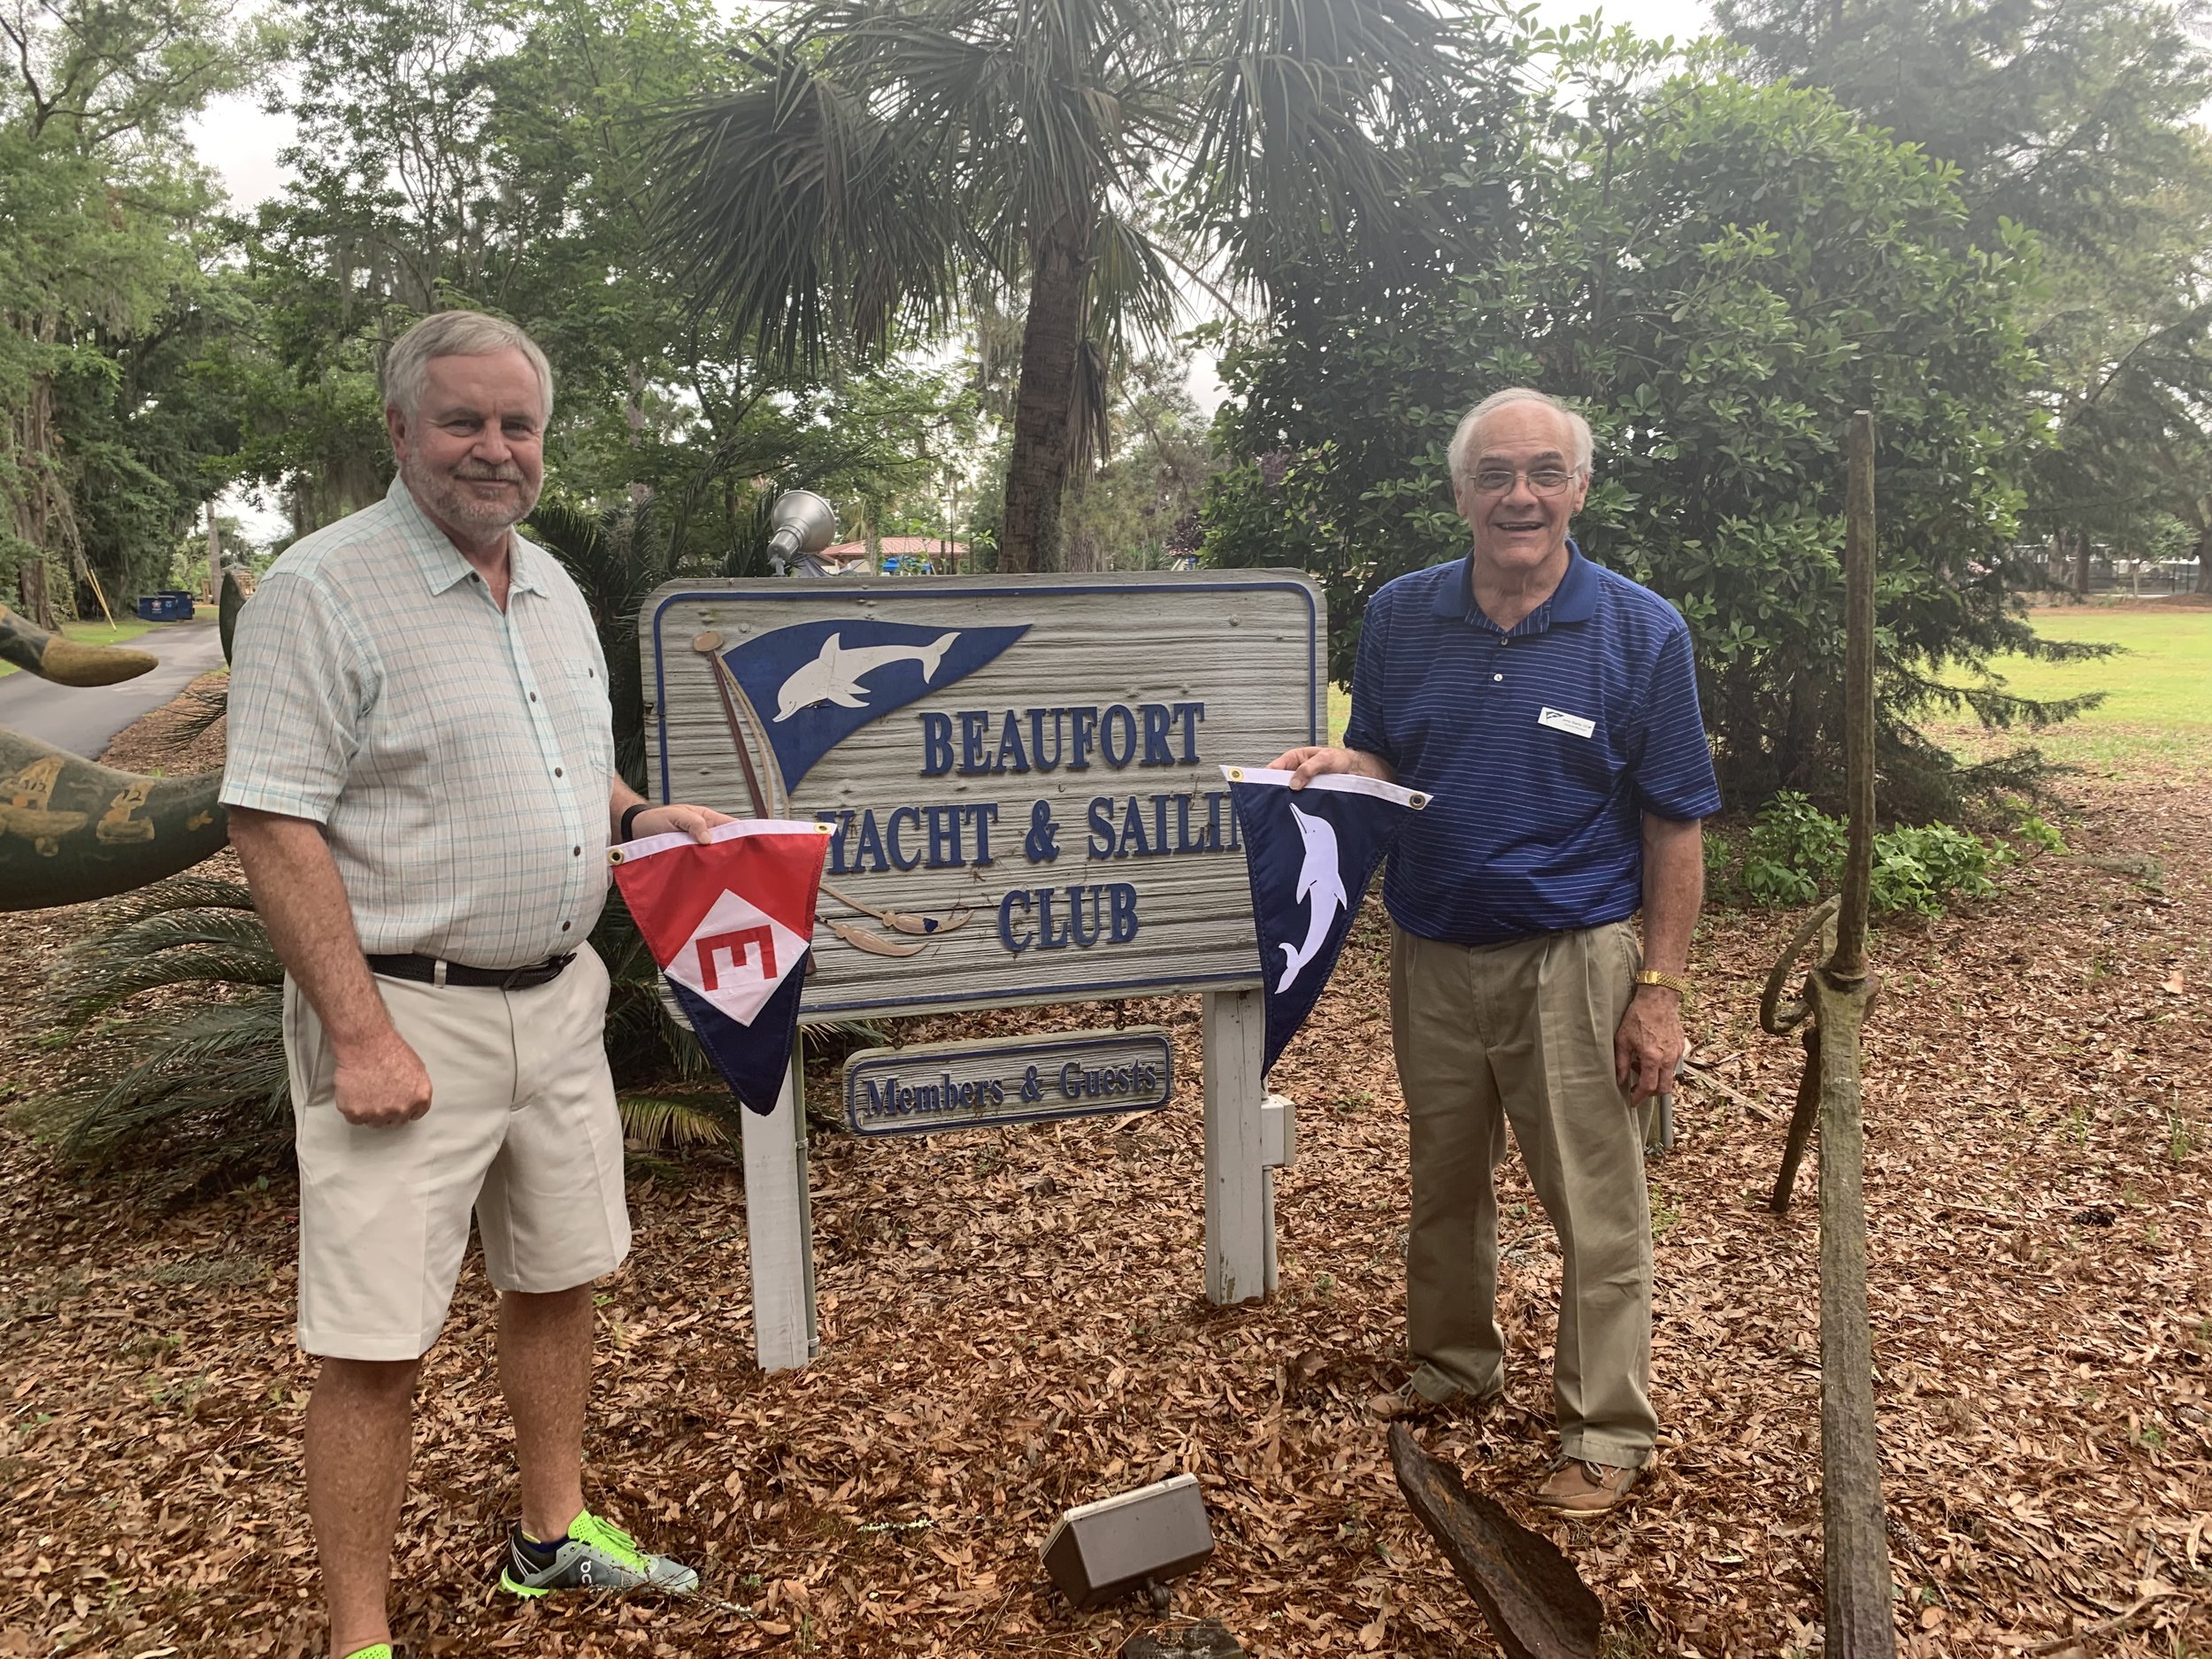  Richard  exchanges burgees with the Commodore of Beaufort Yacht &amp; Sailing Club in South Carolina 